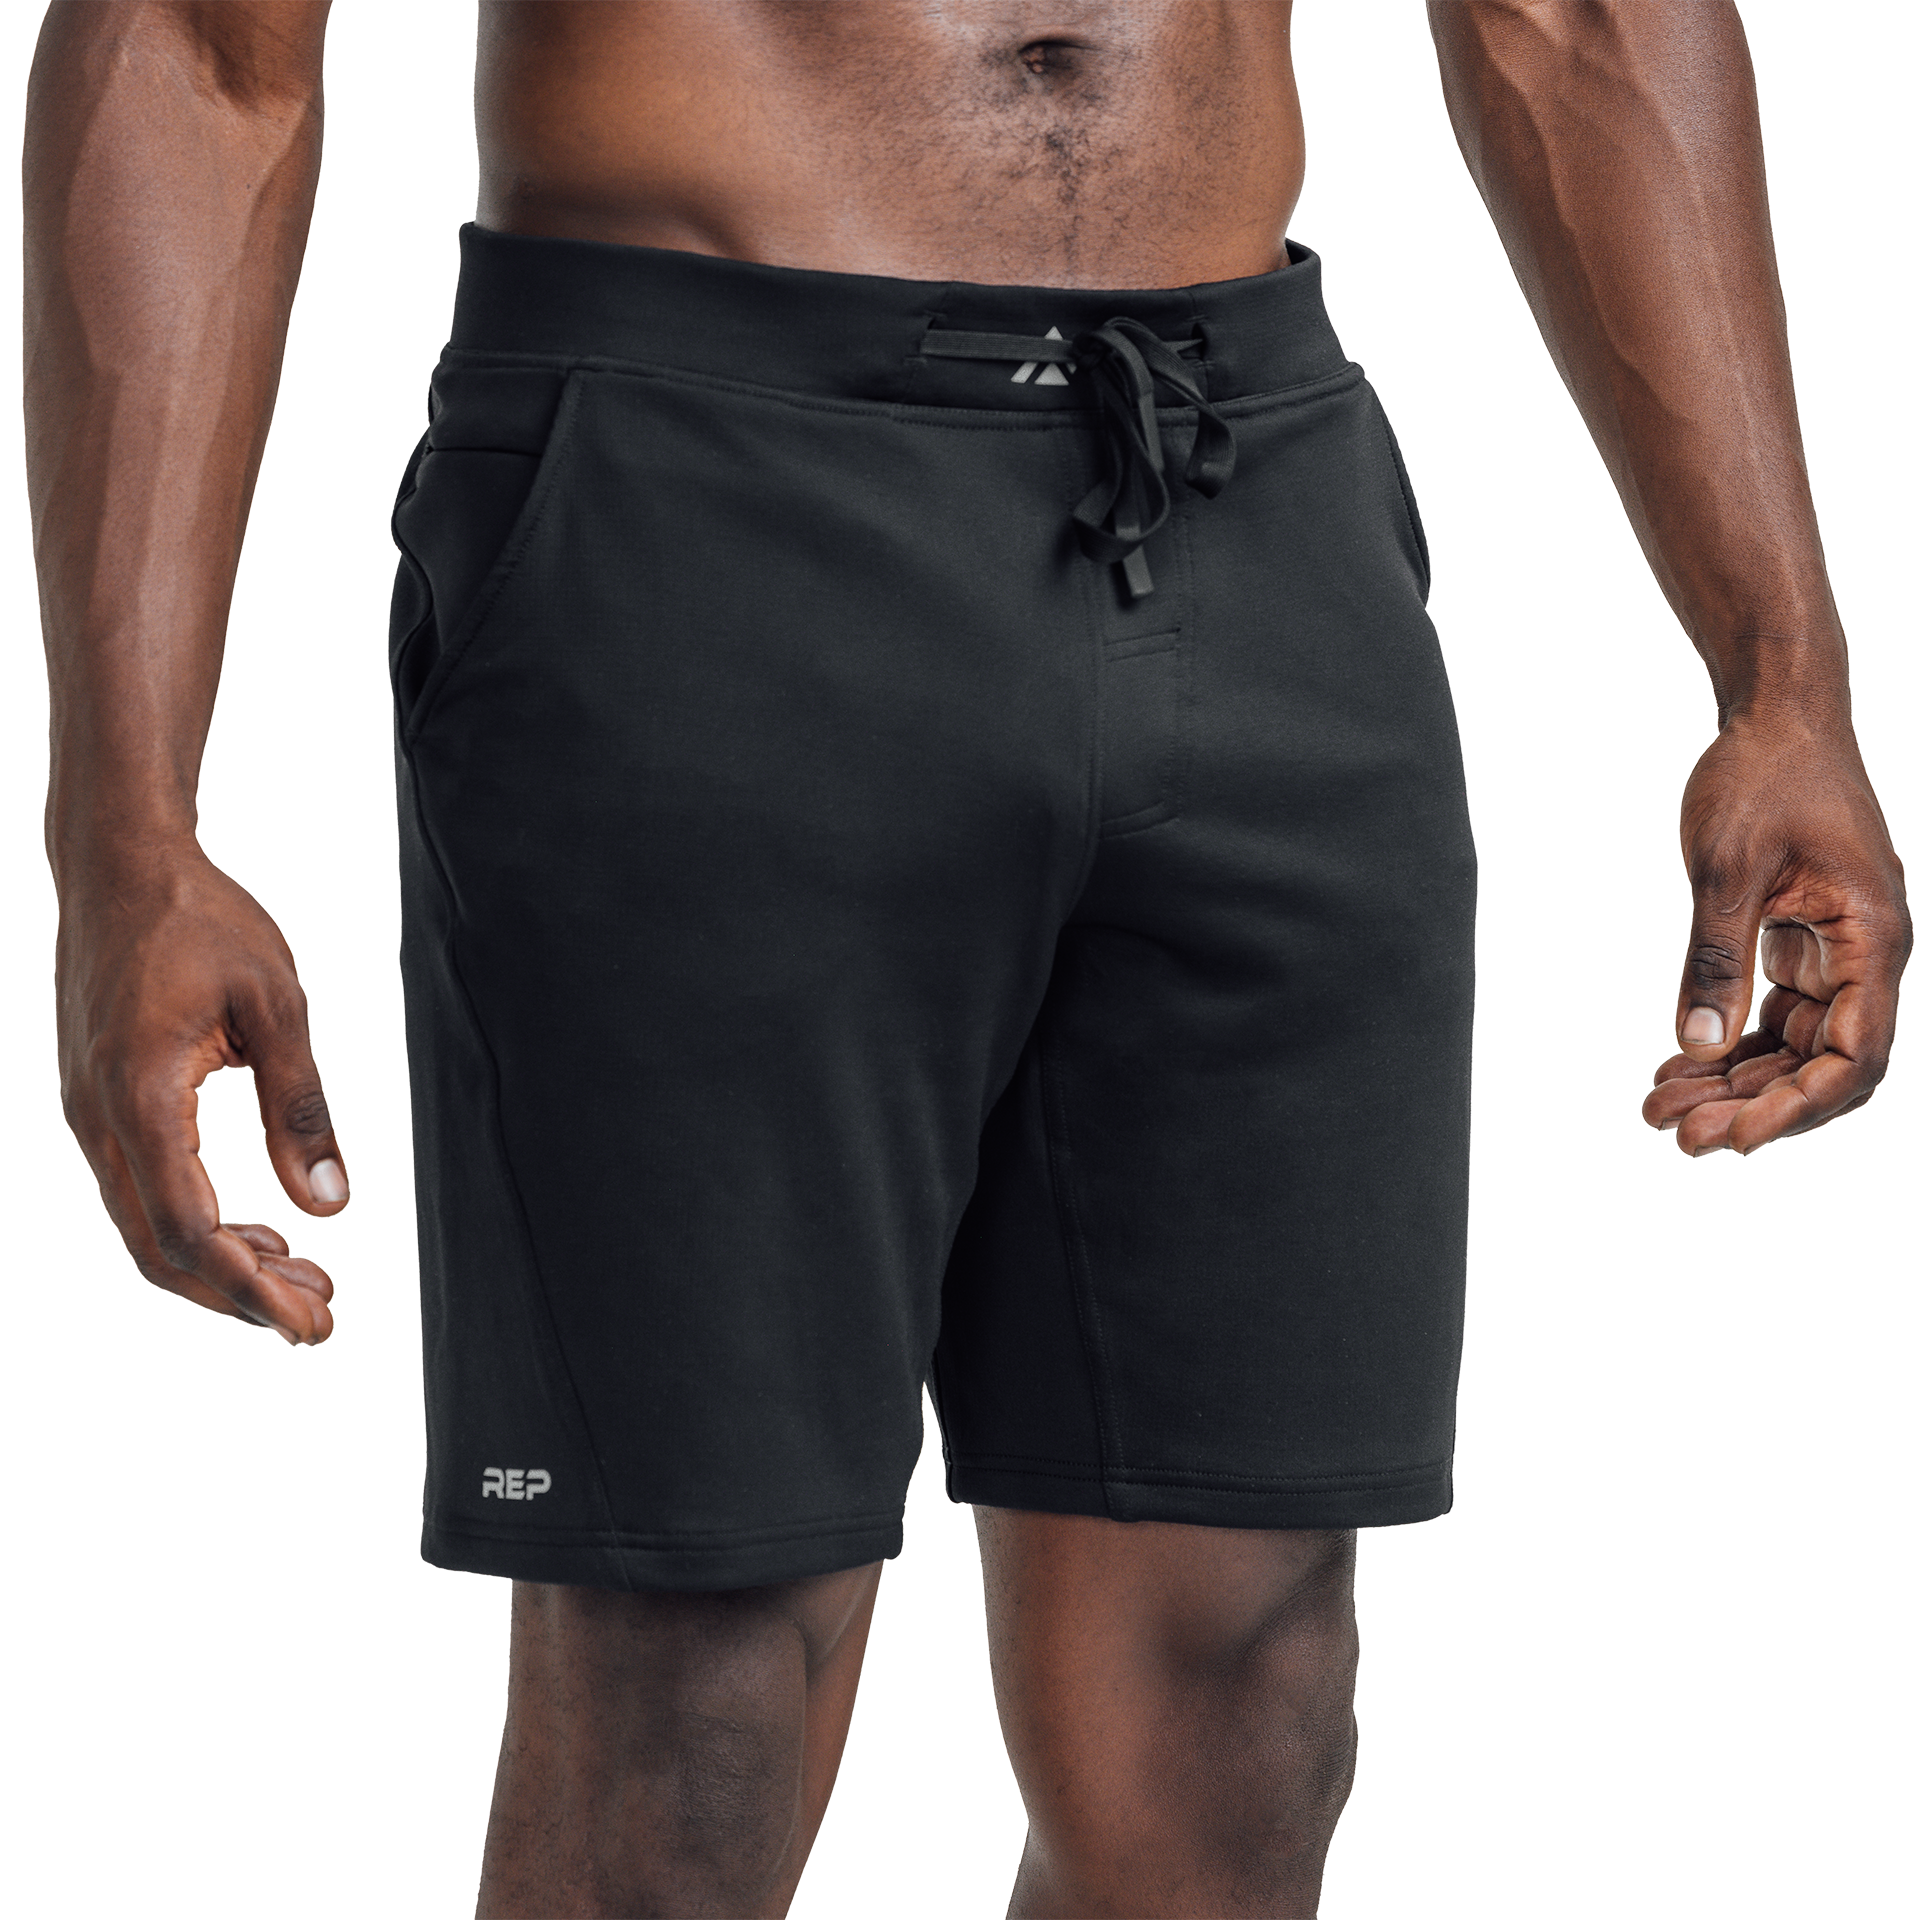 Men's Textured Shorts - All in Motion Black Heather S 